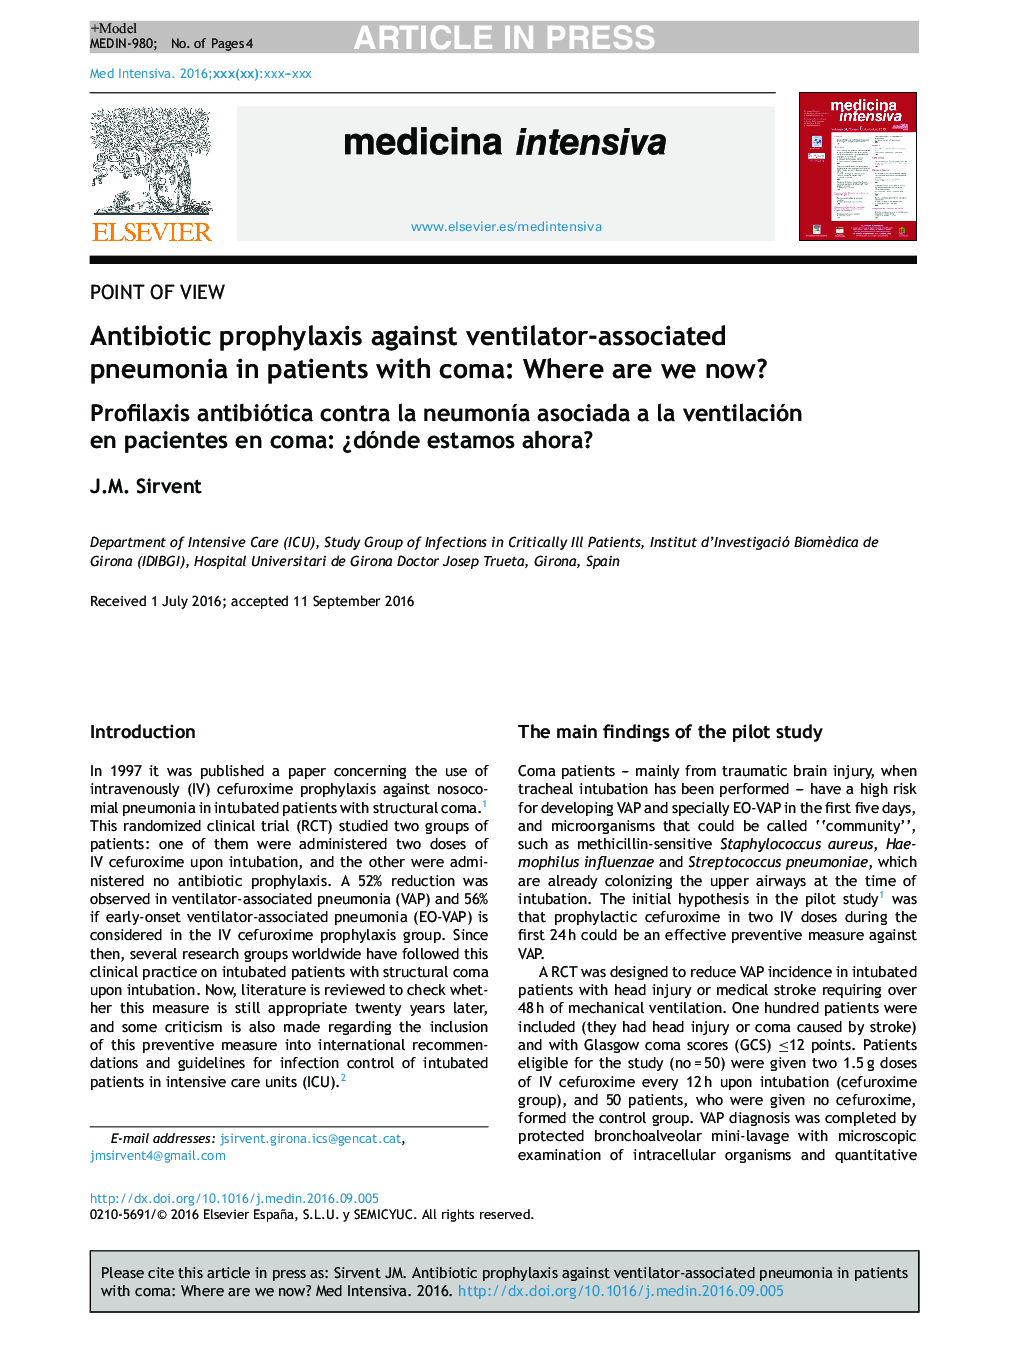 Antibiotic prophylaxis against ventilator-associated pneumonia in patients with coma: Where are we now?